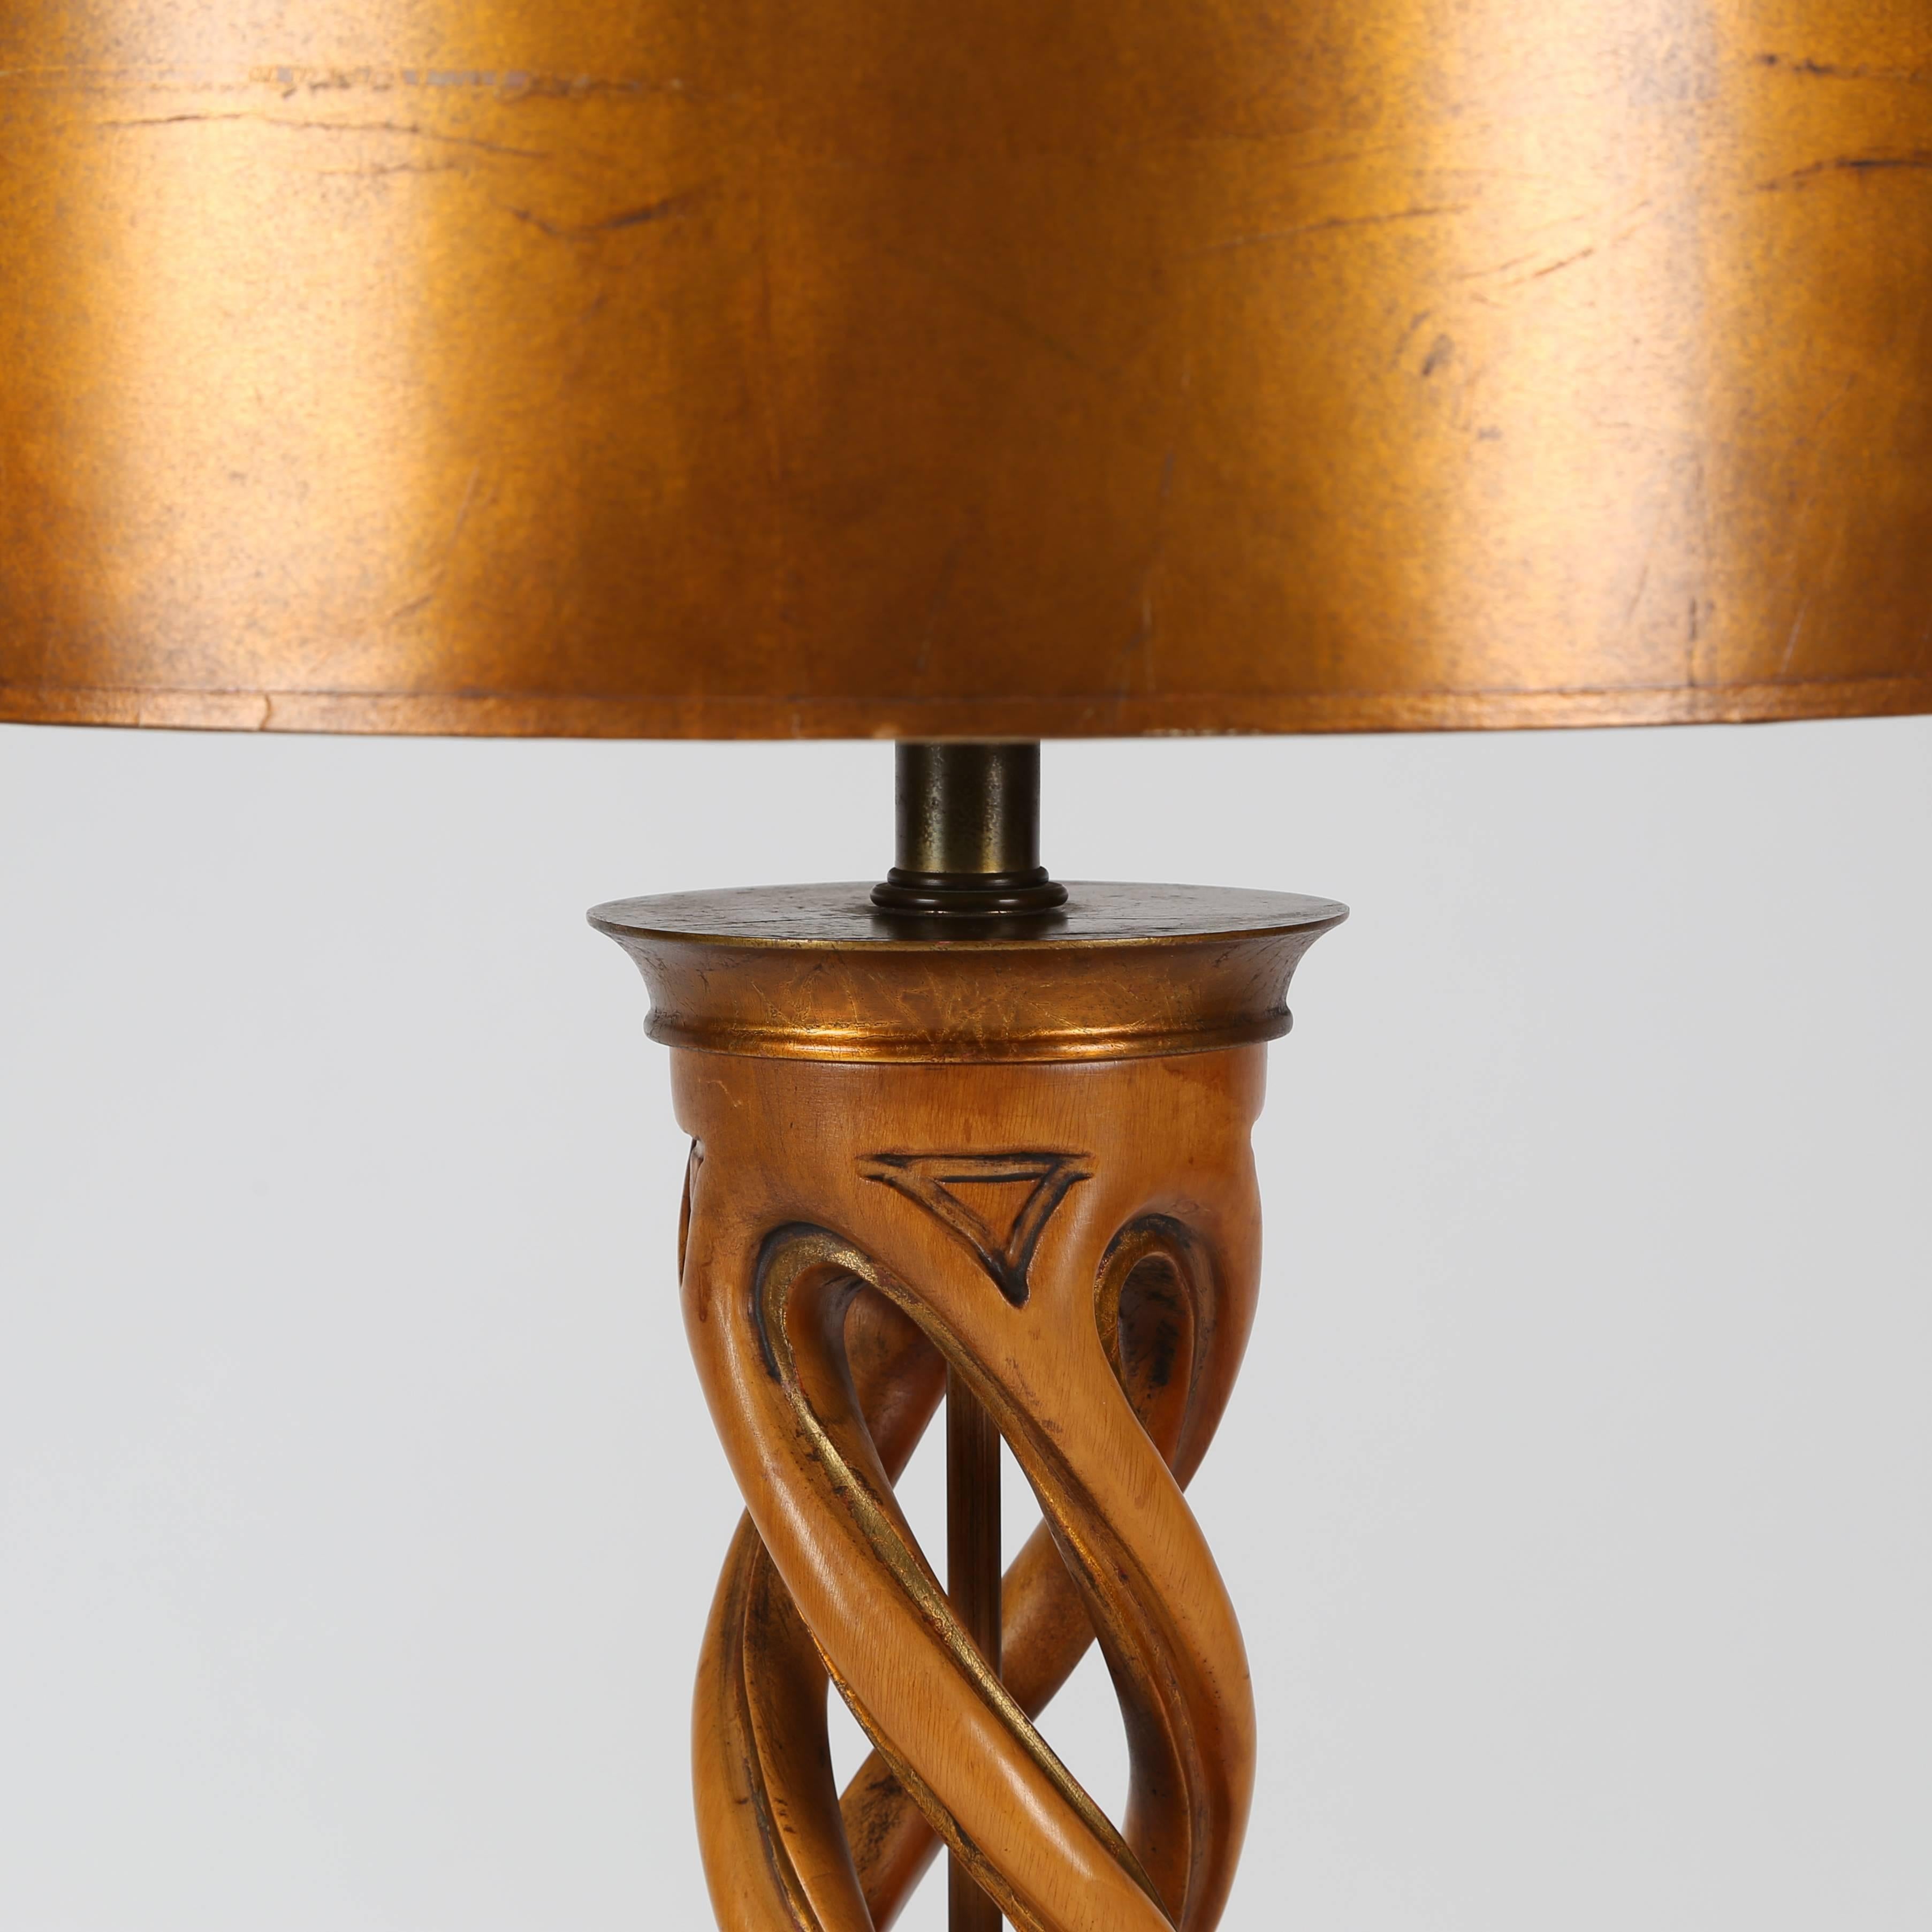 Exceptional carved helix table lamp in bleached mahogany with gilt accents, gilt base and cap, and original gilt shade and finial. Glass diffuser supports the shade. Uses a three-way mogul bulb. All original, except for new wiring. Manufactured by